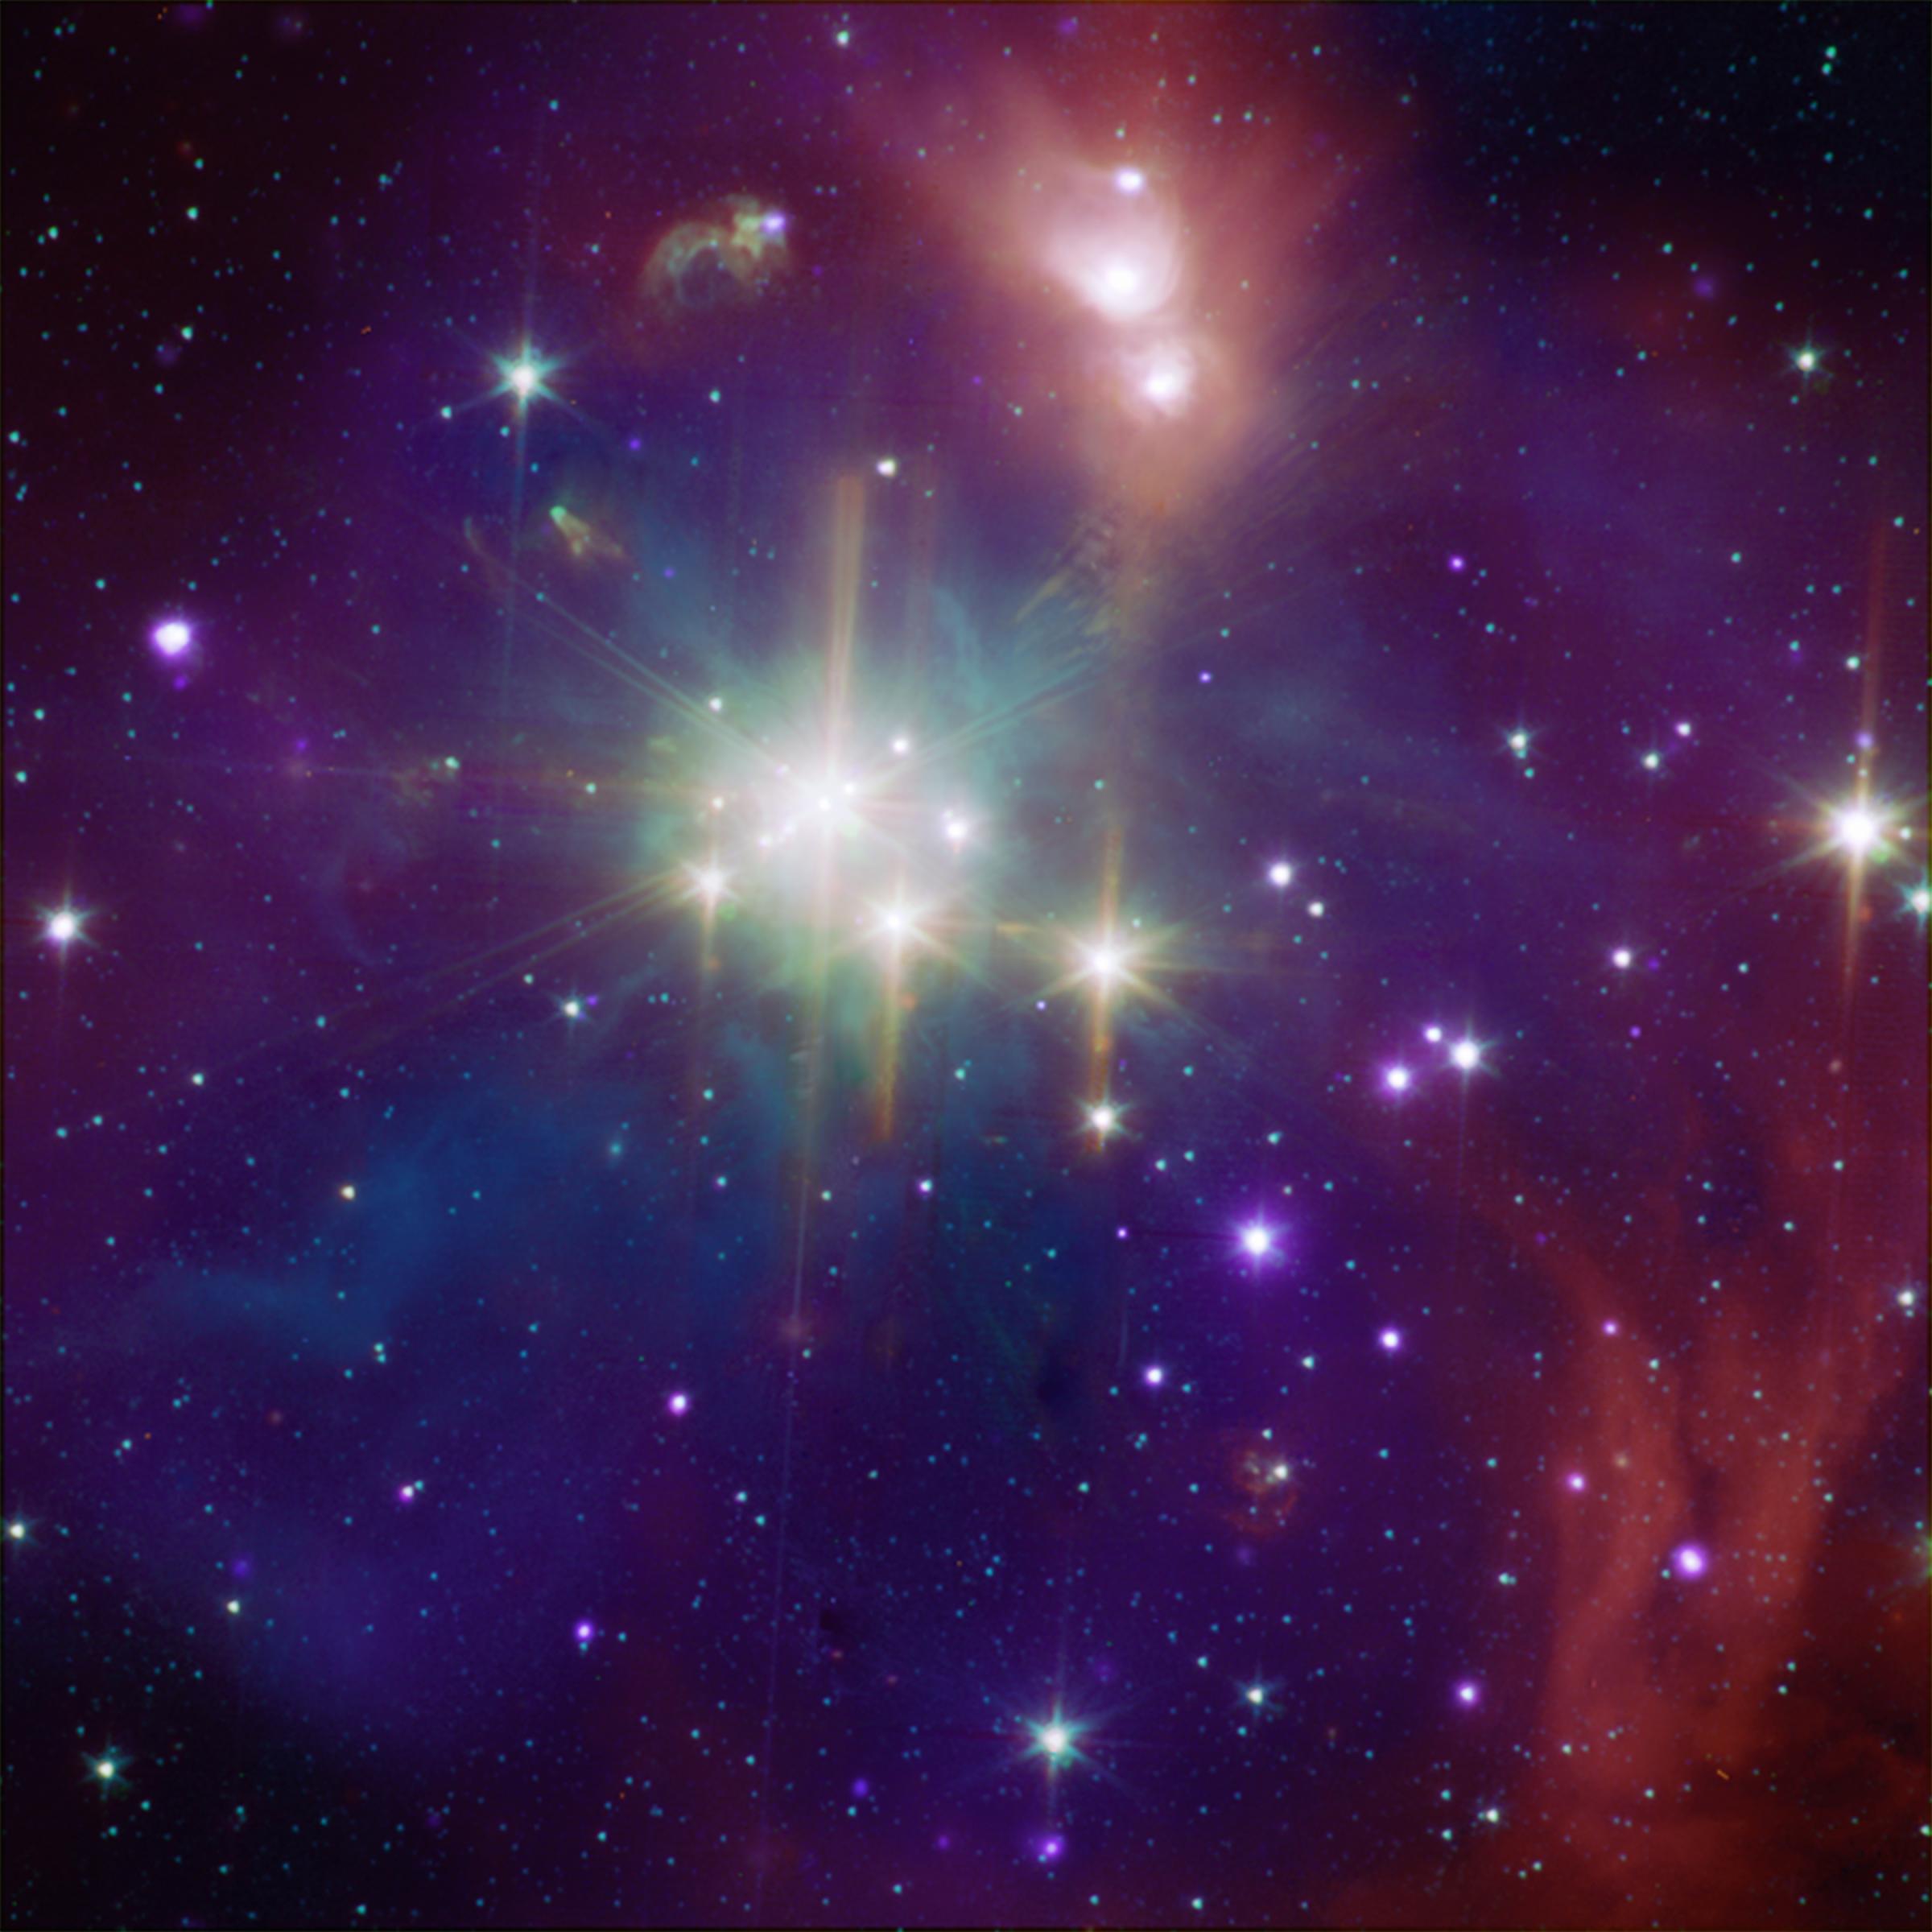 The Corona Australis region (containing, at its heart, the Coronet cluster) is one of the nearest and most active regions of ongoing star formation. This composite X-ray and infrared image catches star formation in the act.